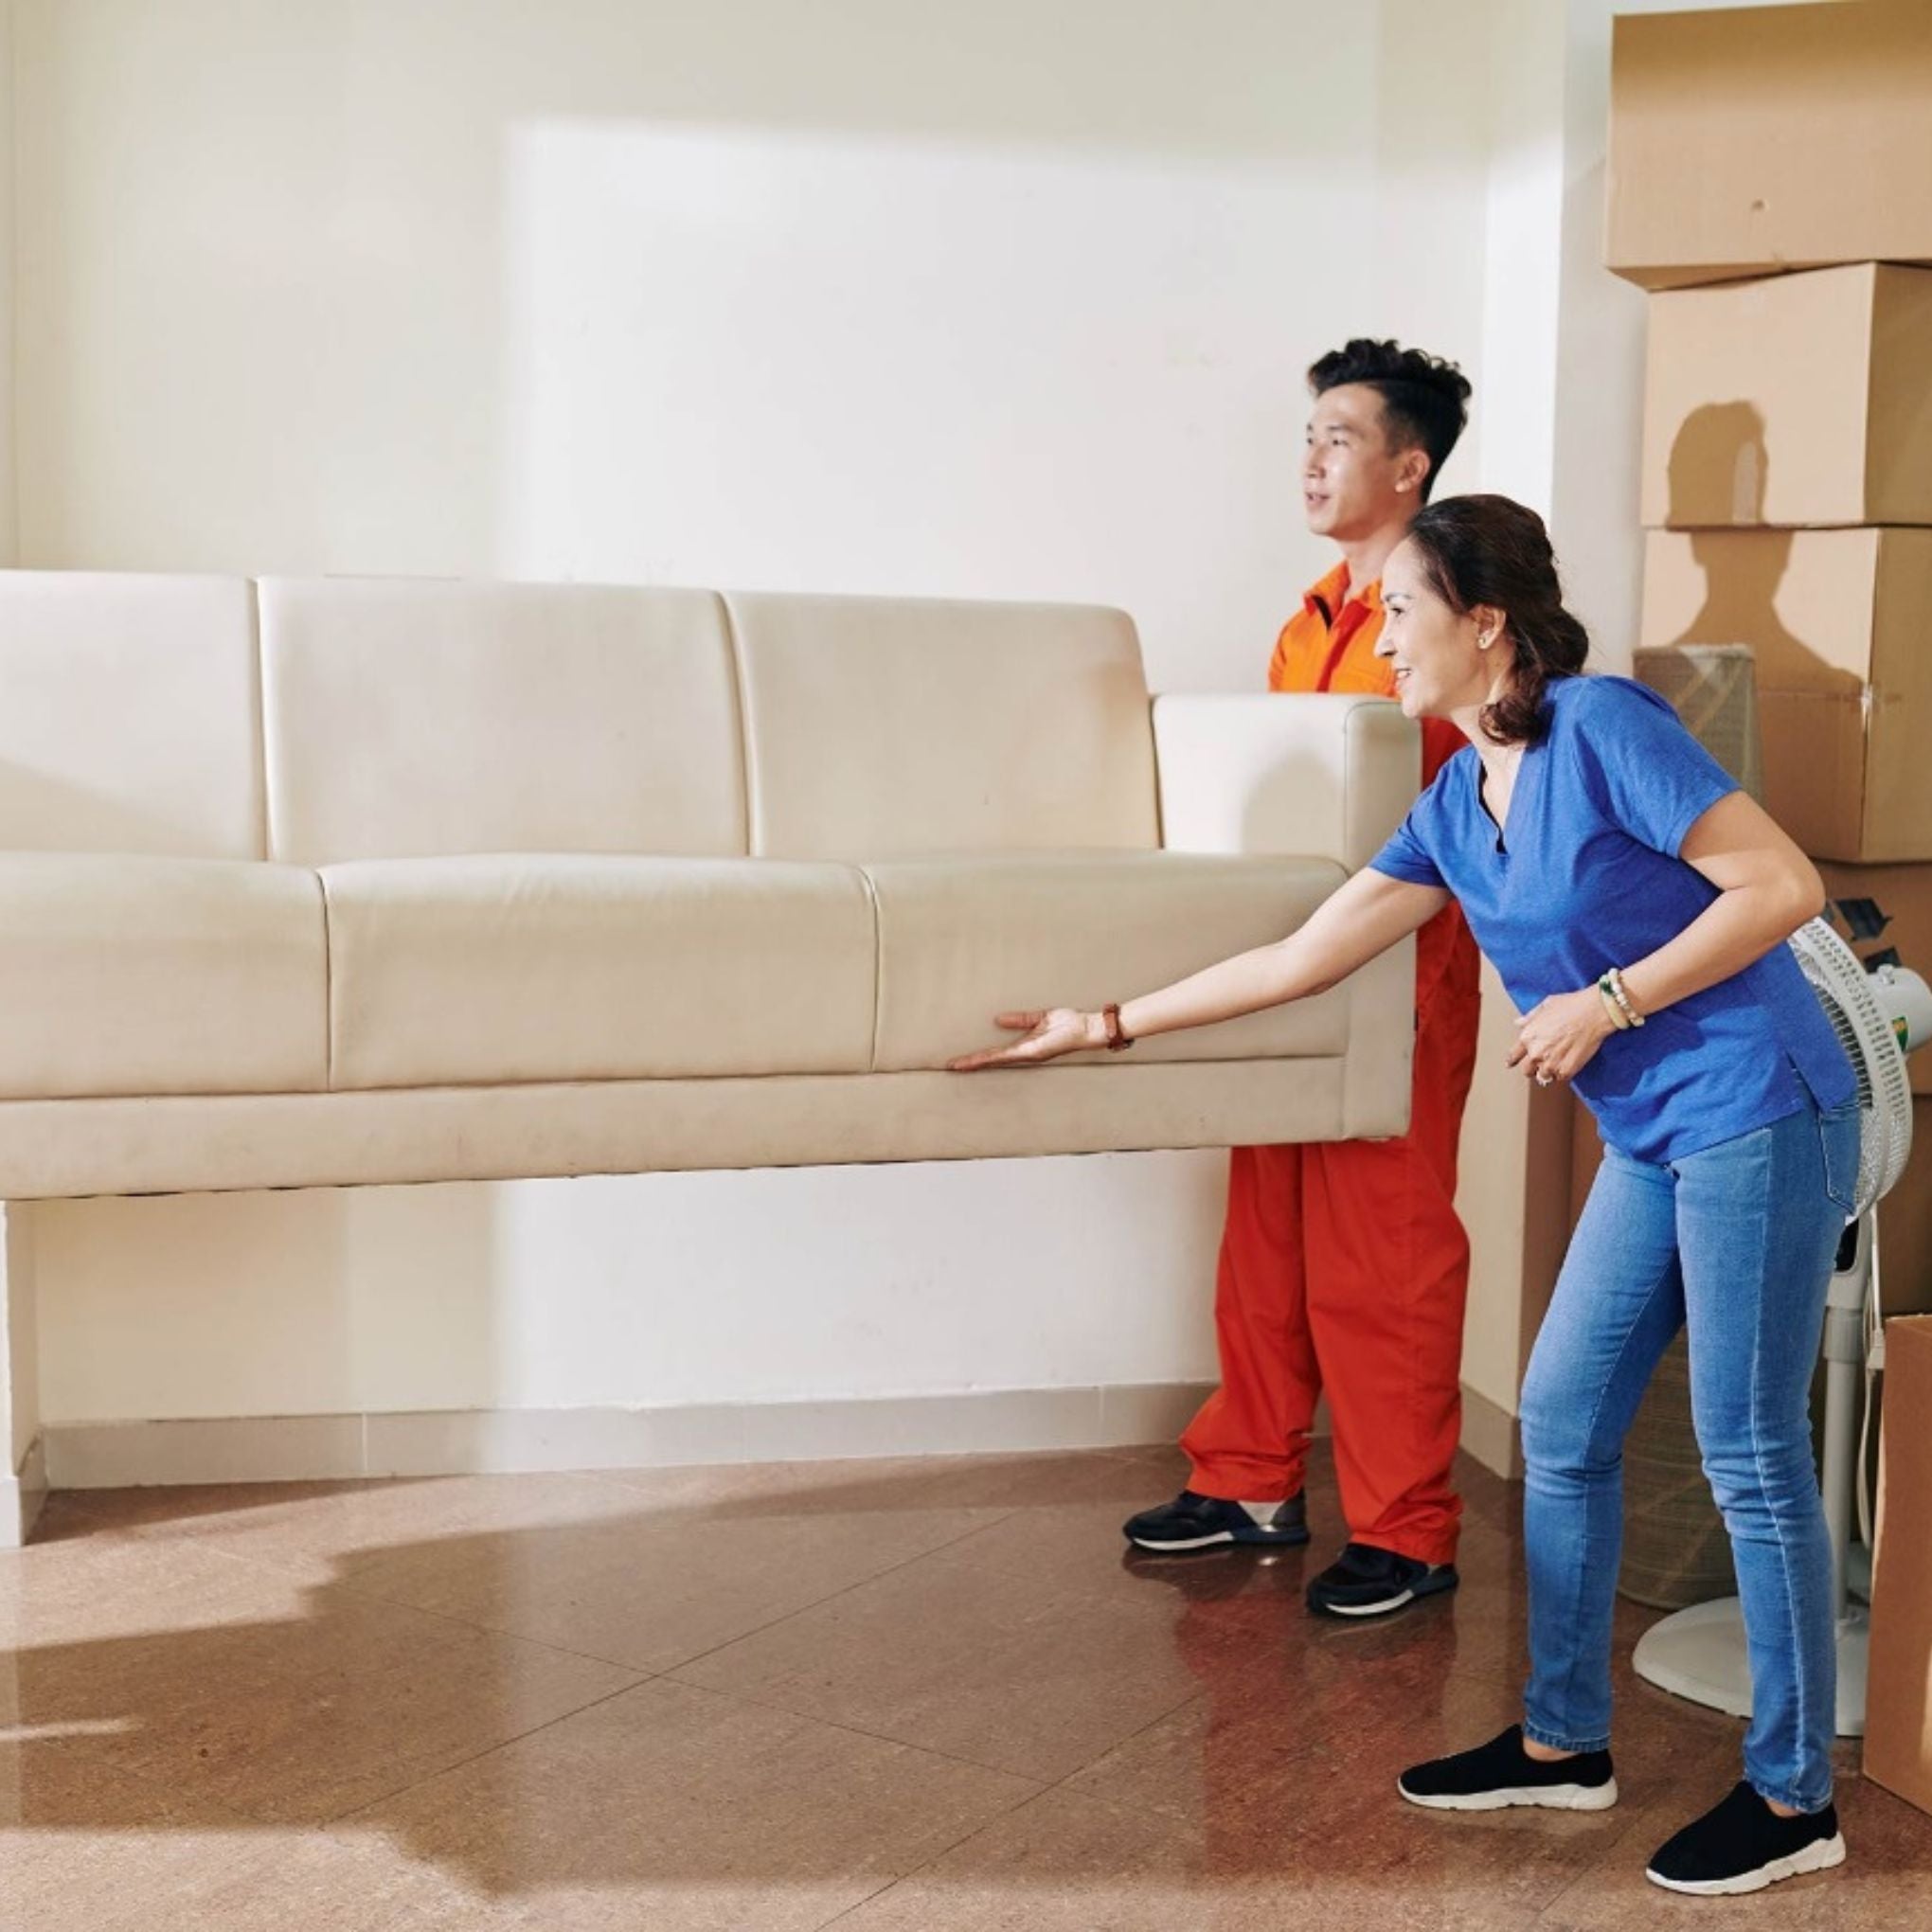 After your sofa arrives in Singapore, we will deliver and assemble your sofa at your desired location